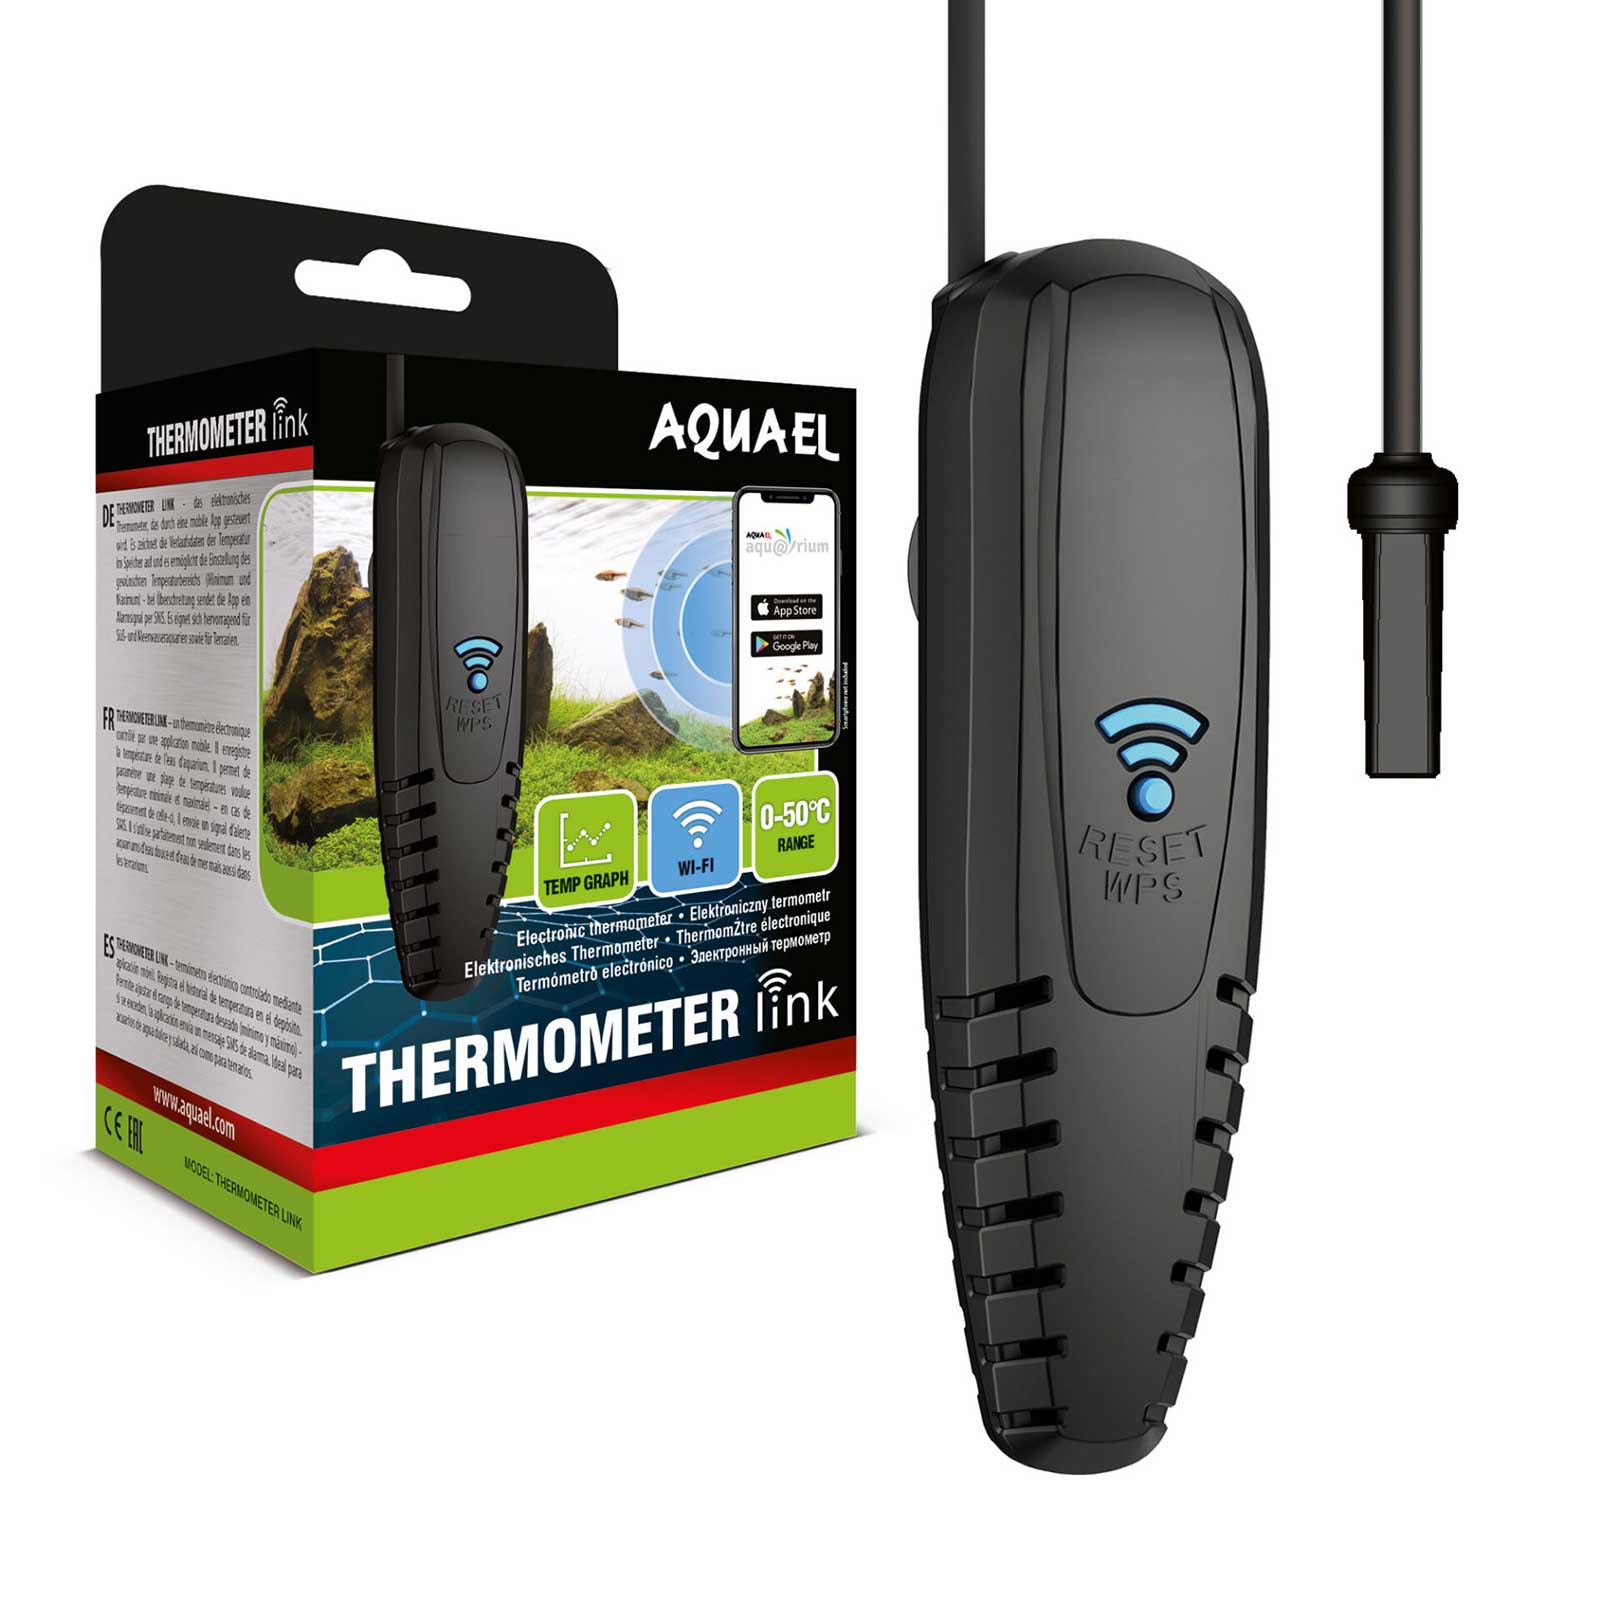 Aquael Thermo Link Wifi Thermometer